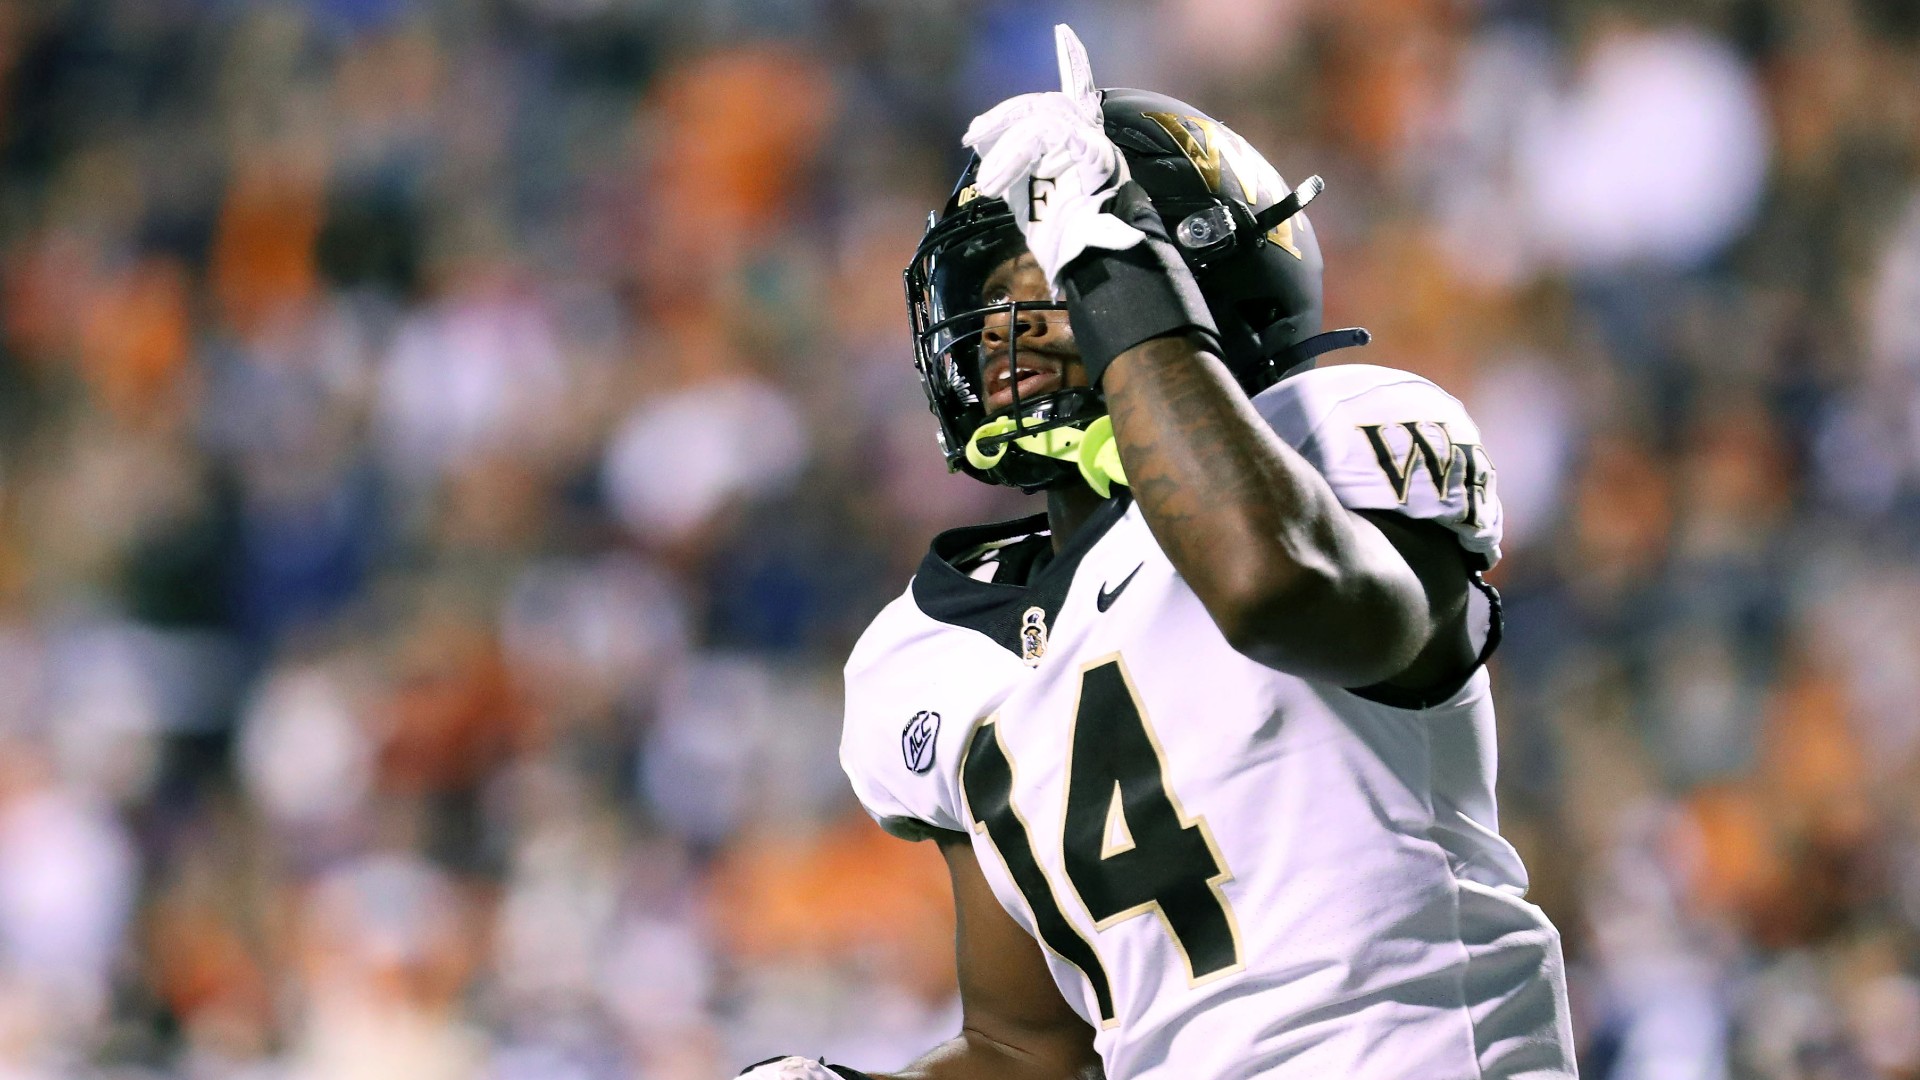 College Football Odds, Picks, Predictions for Louisville vs. Wake Forest: How to Bet This ACC Showdown article feature image